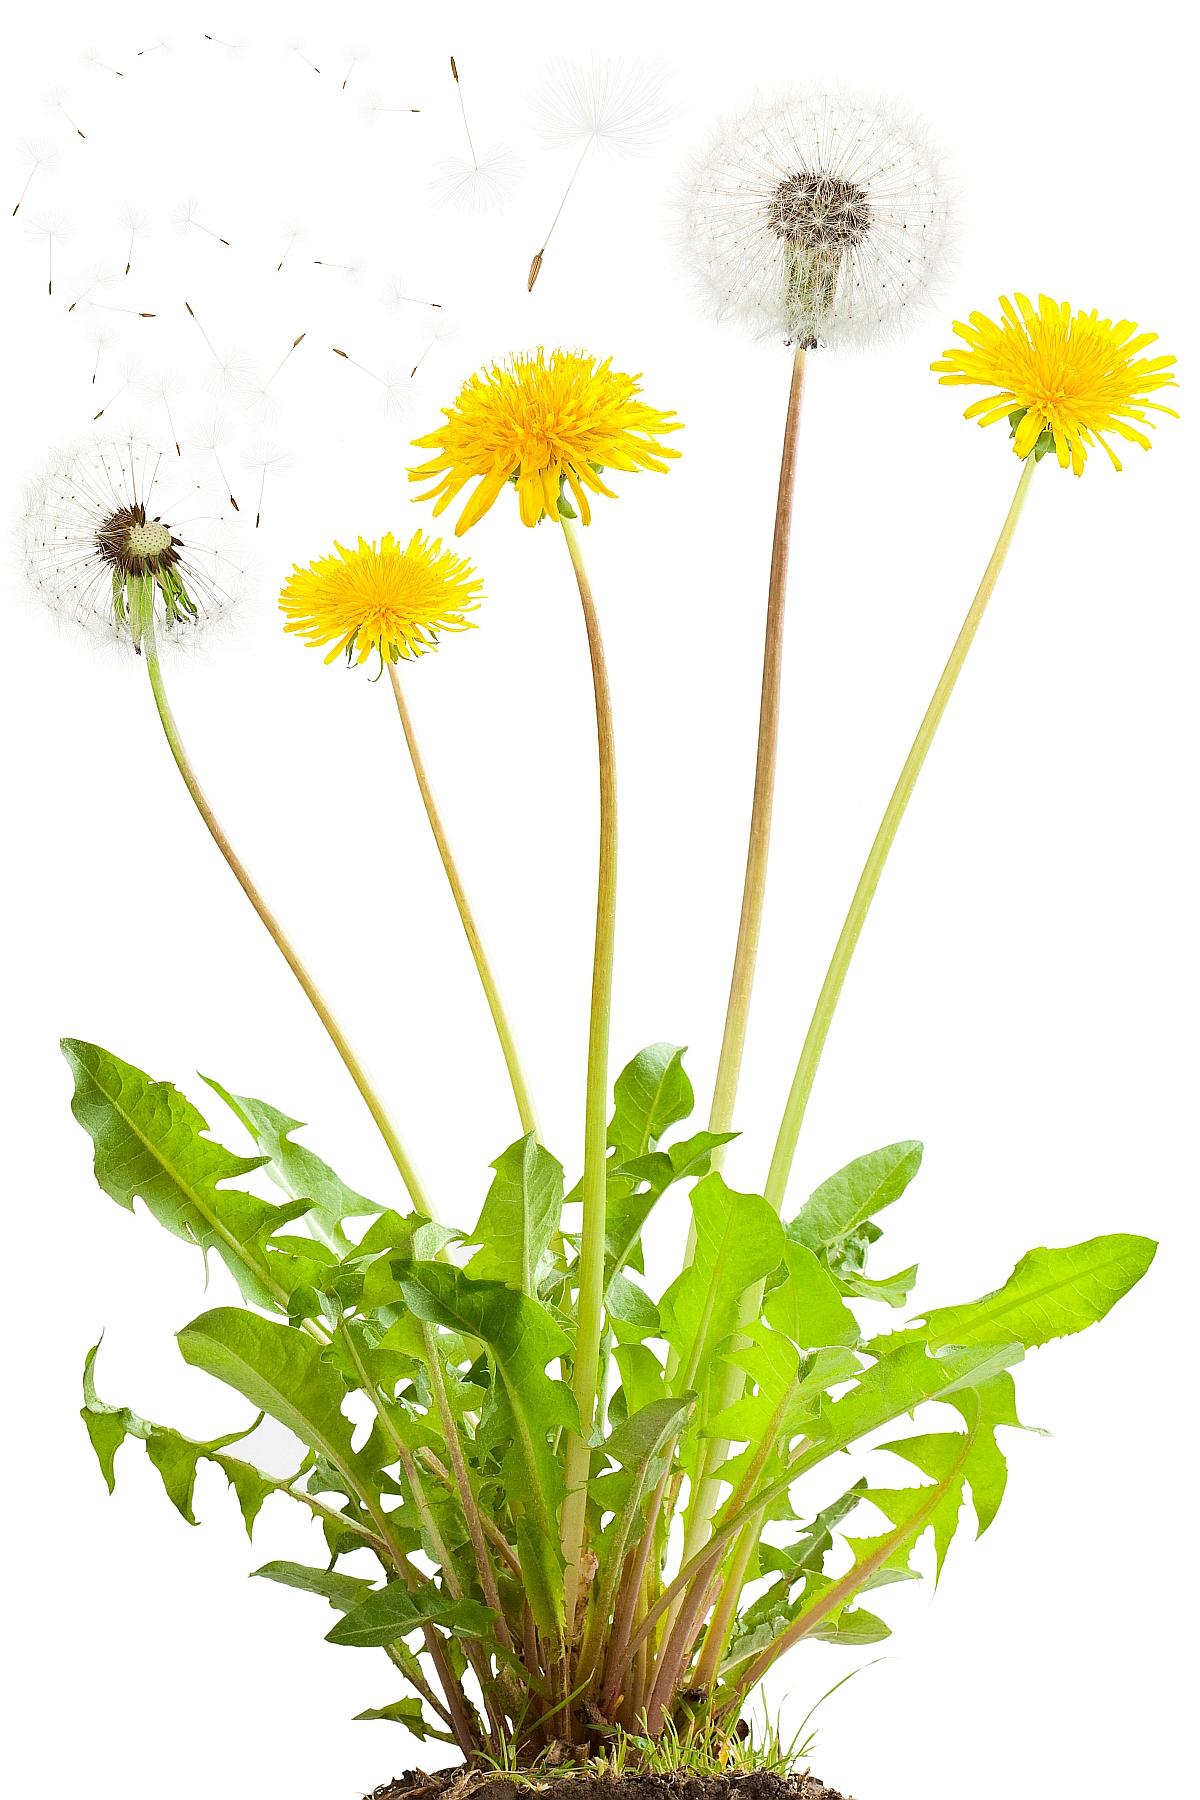 Dandelion flowers and flying seeds. Isolated on white.